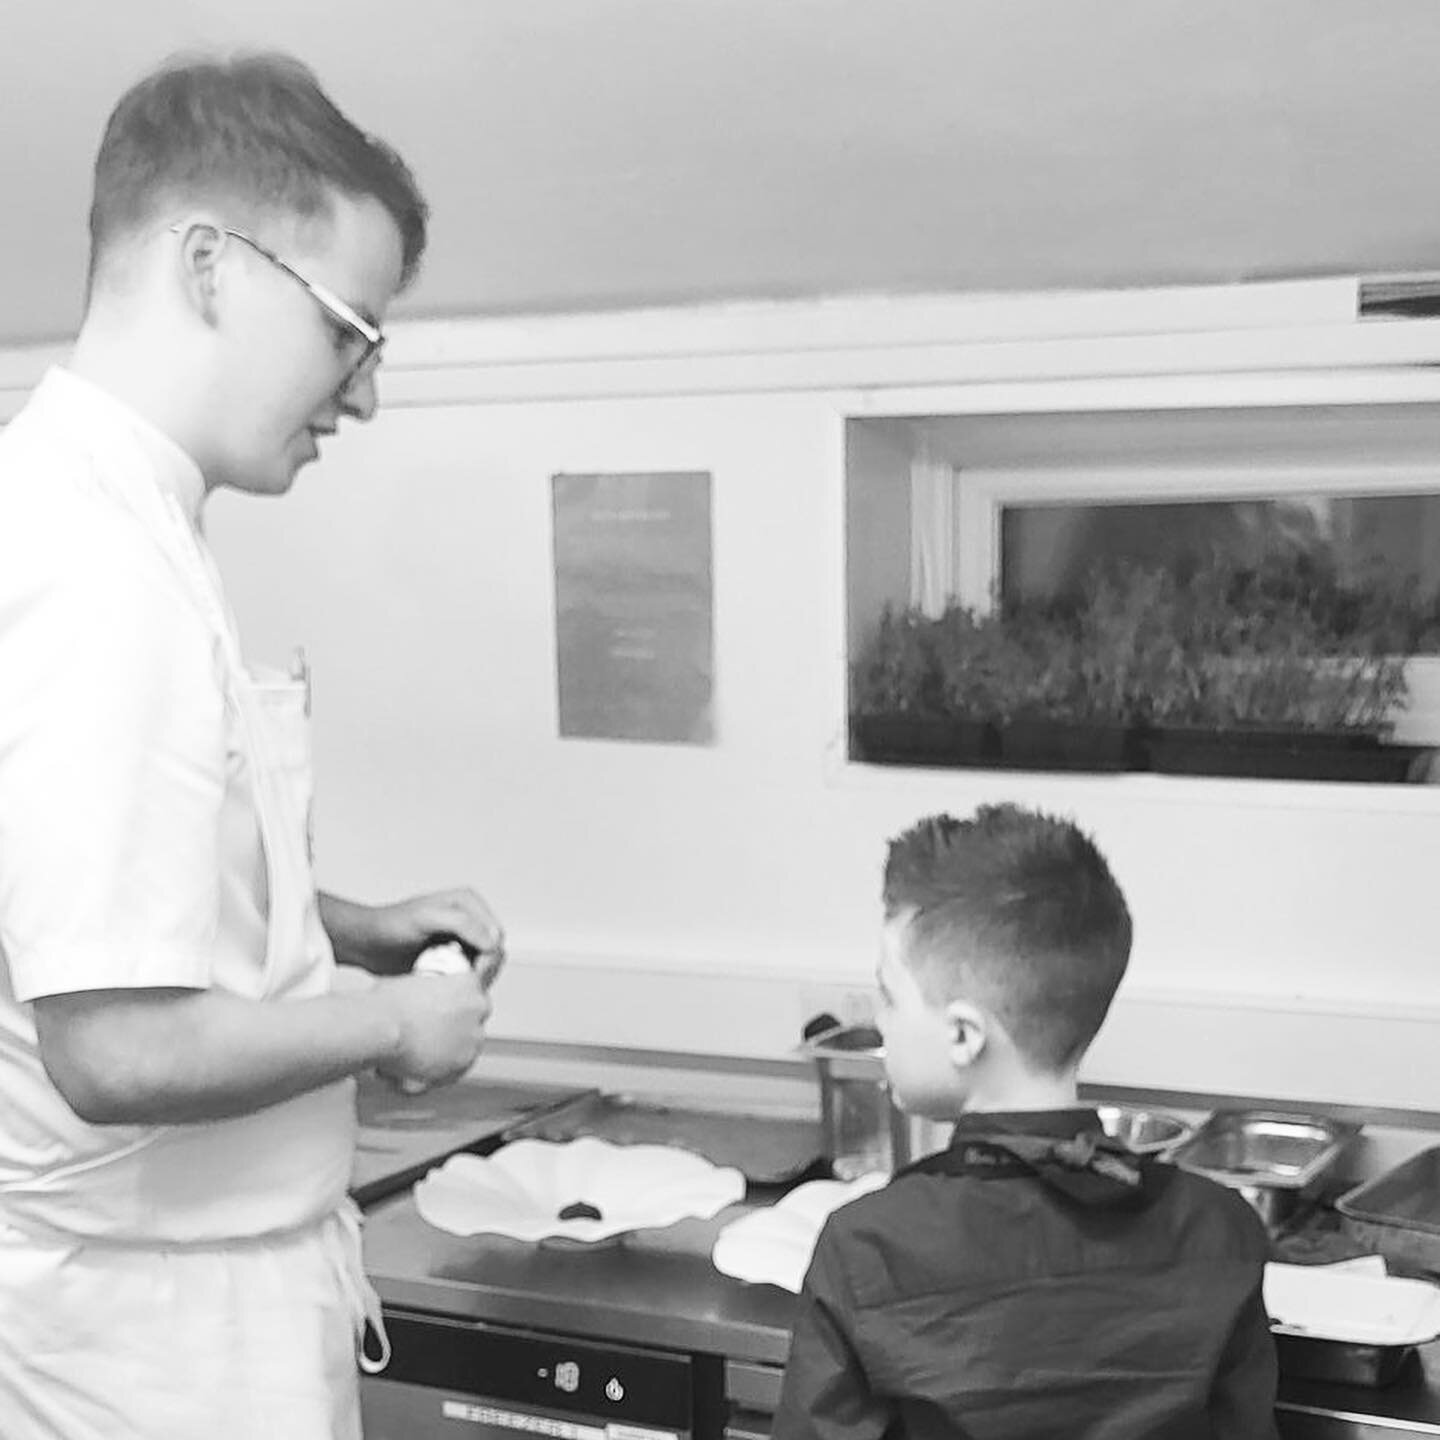 When you have an 8 year old dining in &Agrave;cl&egrave;af, what else do you do apart from invite him in to the kitchen to help plate his dessert under the watchful eye of Head Pastry Chef @johnbrimicombe 

👏🏼 to @scottipaton @johnbrimicombe @man_o